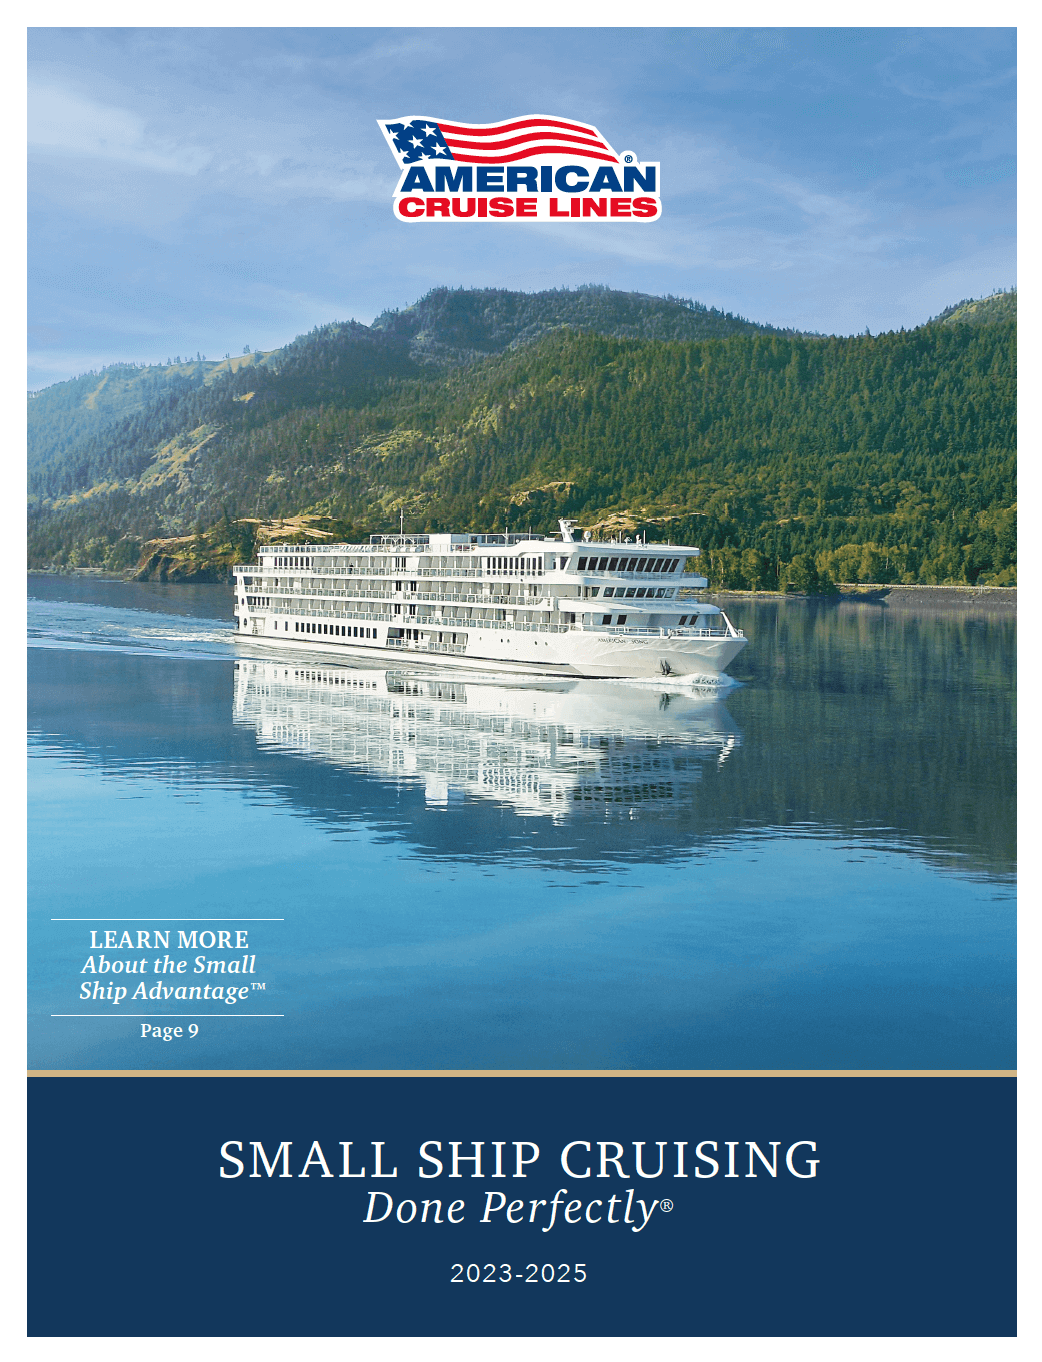 ACL-Brochure-Cover-2023-2024 - Sunstone Tours & Cruises